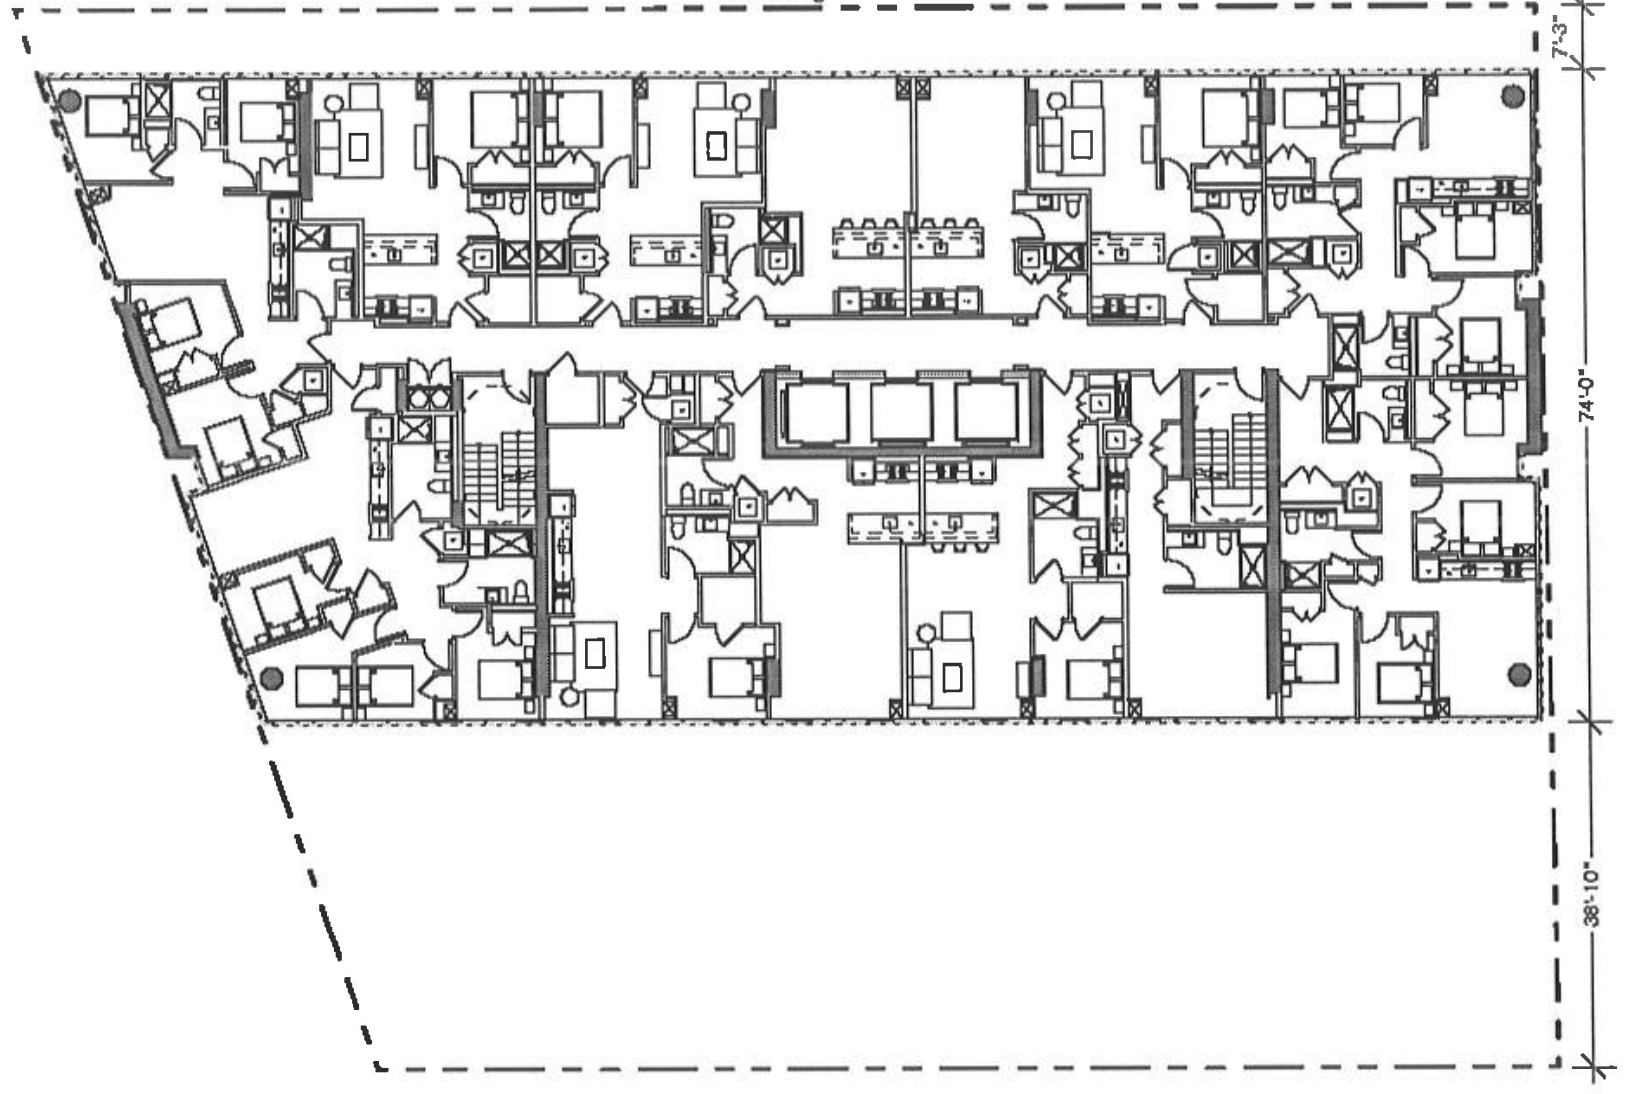 808 N Cleveland Avenue typical residential floor plan